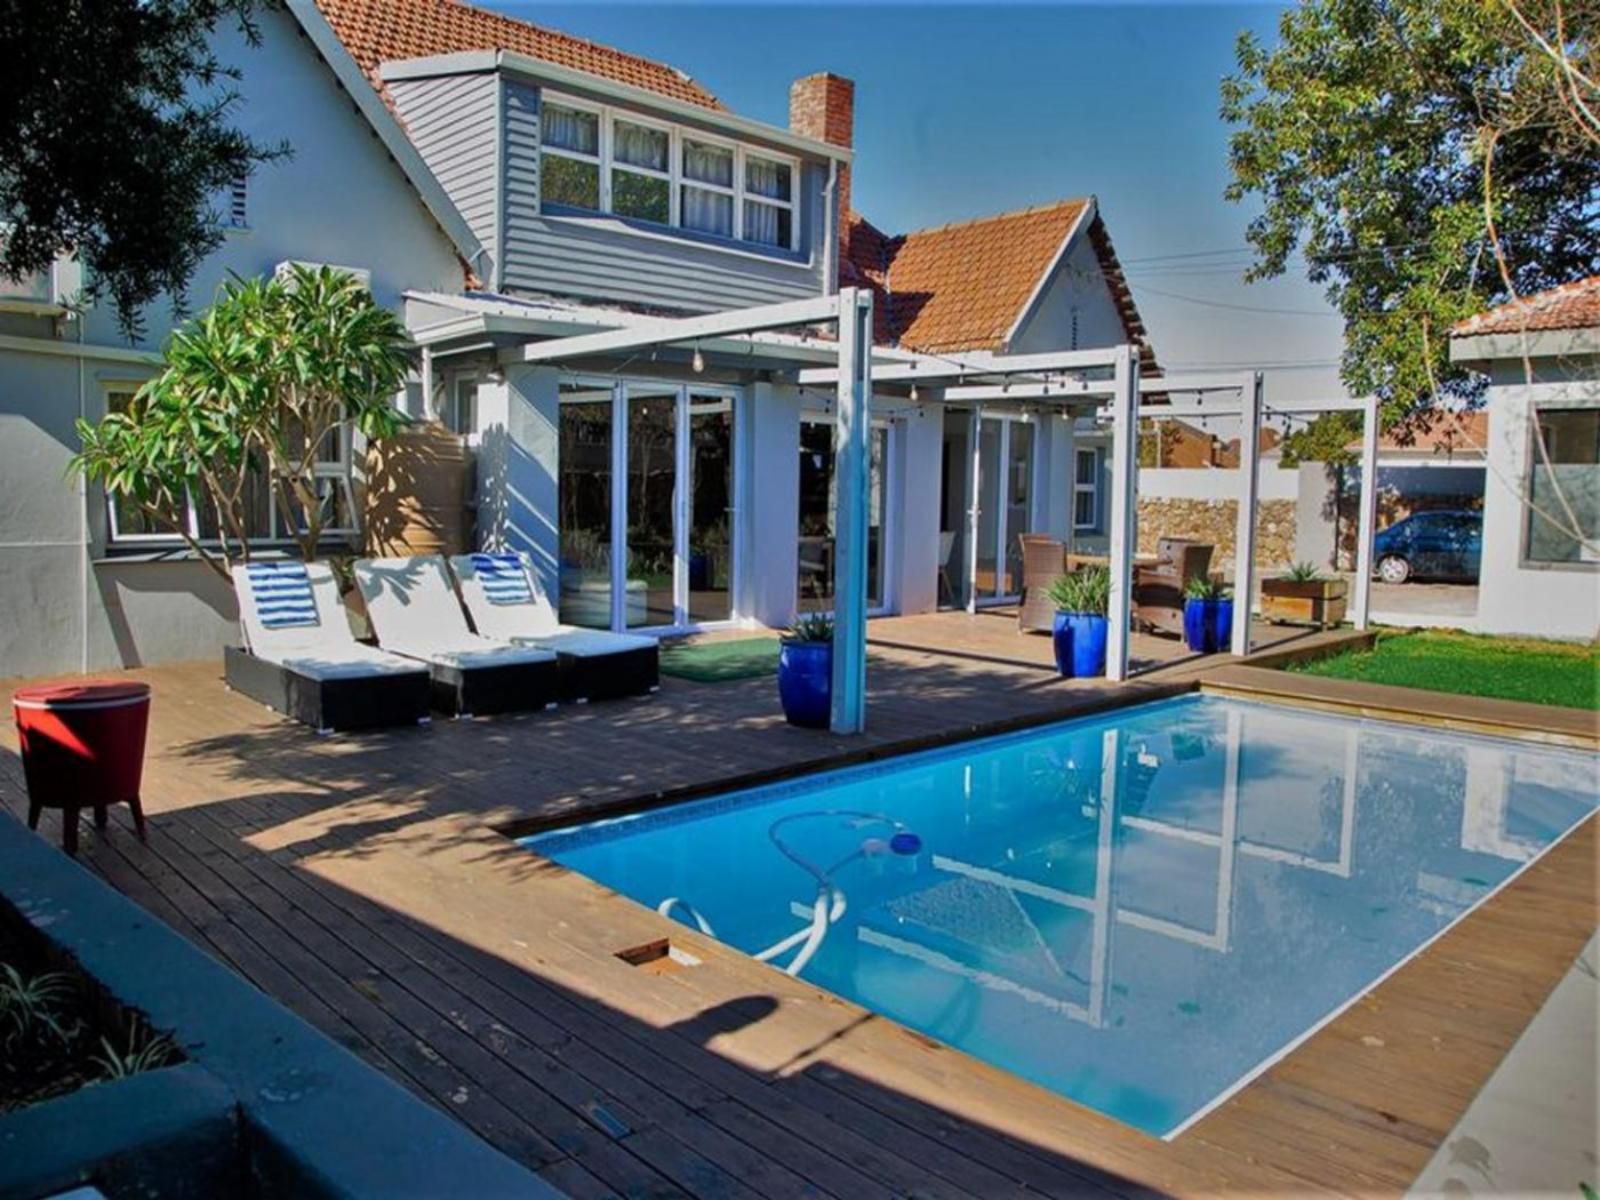 Nia On 131 Rondebosch Cape Town Western Cape South Africa House, Building, Architecture, Swimming Pool